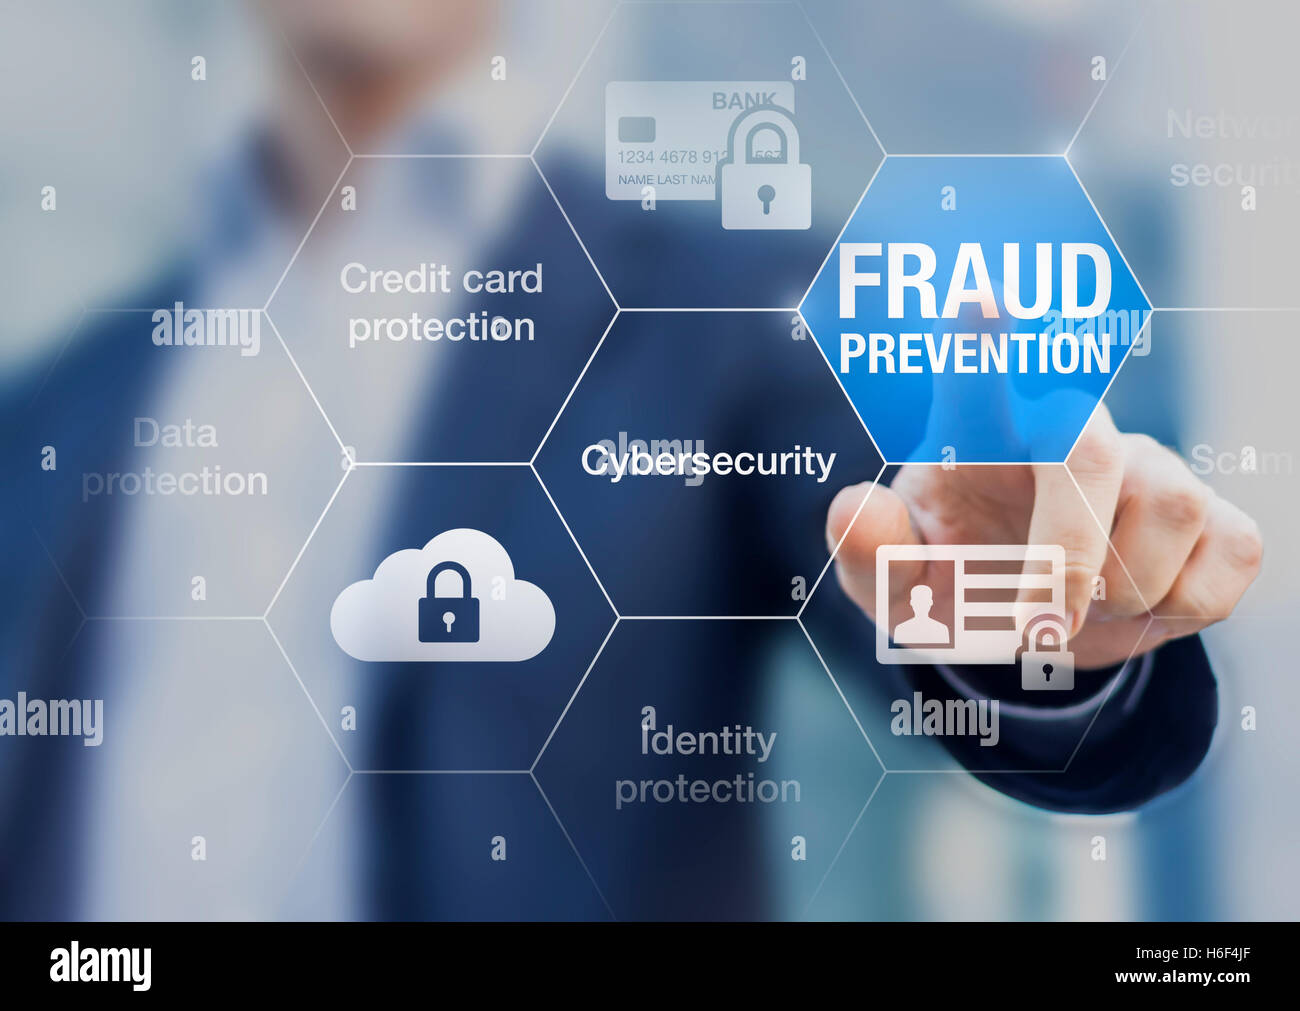 Fraud prevention button, concept about cybersecurity, credit card and identity protection against cyberattack and online thieves Stock Photo